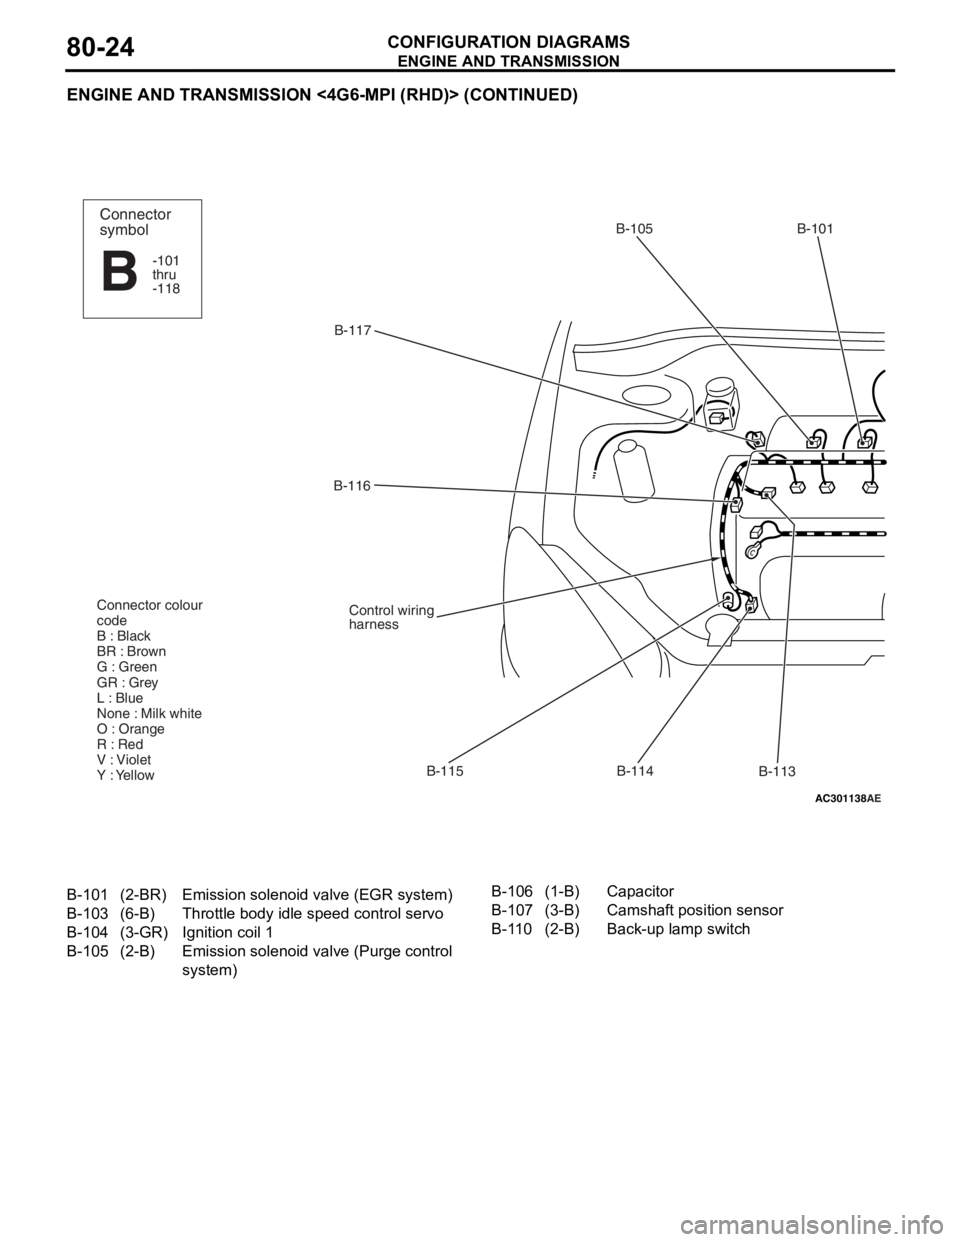 MITSUBISHI LANCER 2006  Workshop Manual 
ENGINE AND TRANSMISSION
CONFIGURATION DIAGRAMS80-24
ENGINE AND TRANSMISSION <4G6-MPI (RHD)> (CONTINUED)
AC301138AE
B-117B-105 B-101
B-113
B-114
B-115
B-116
Control wiring
harness
Connector colour
cod